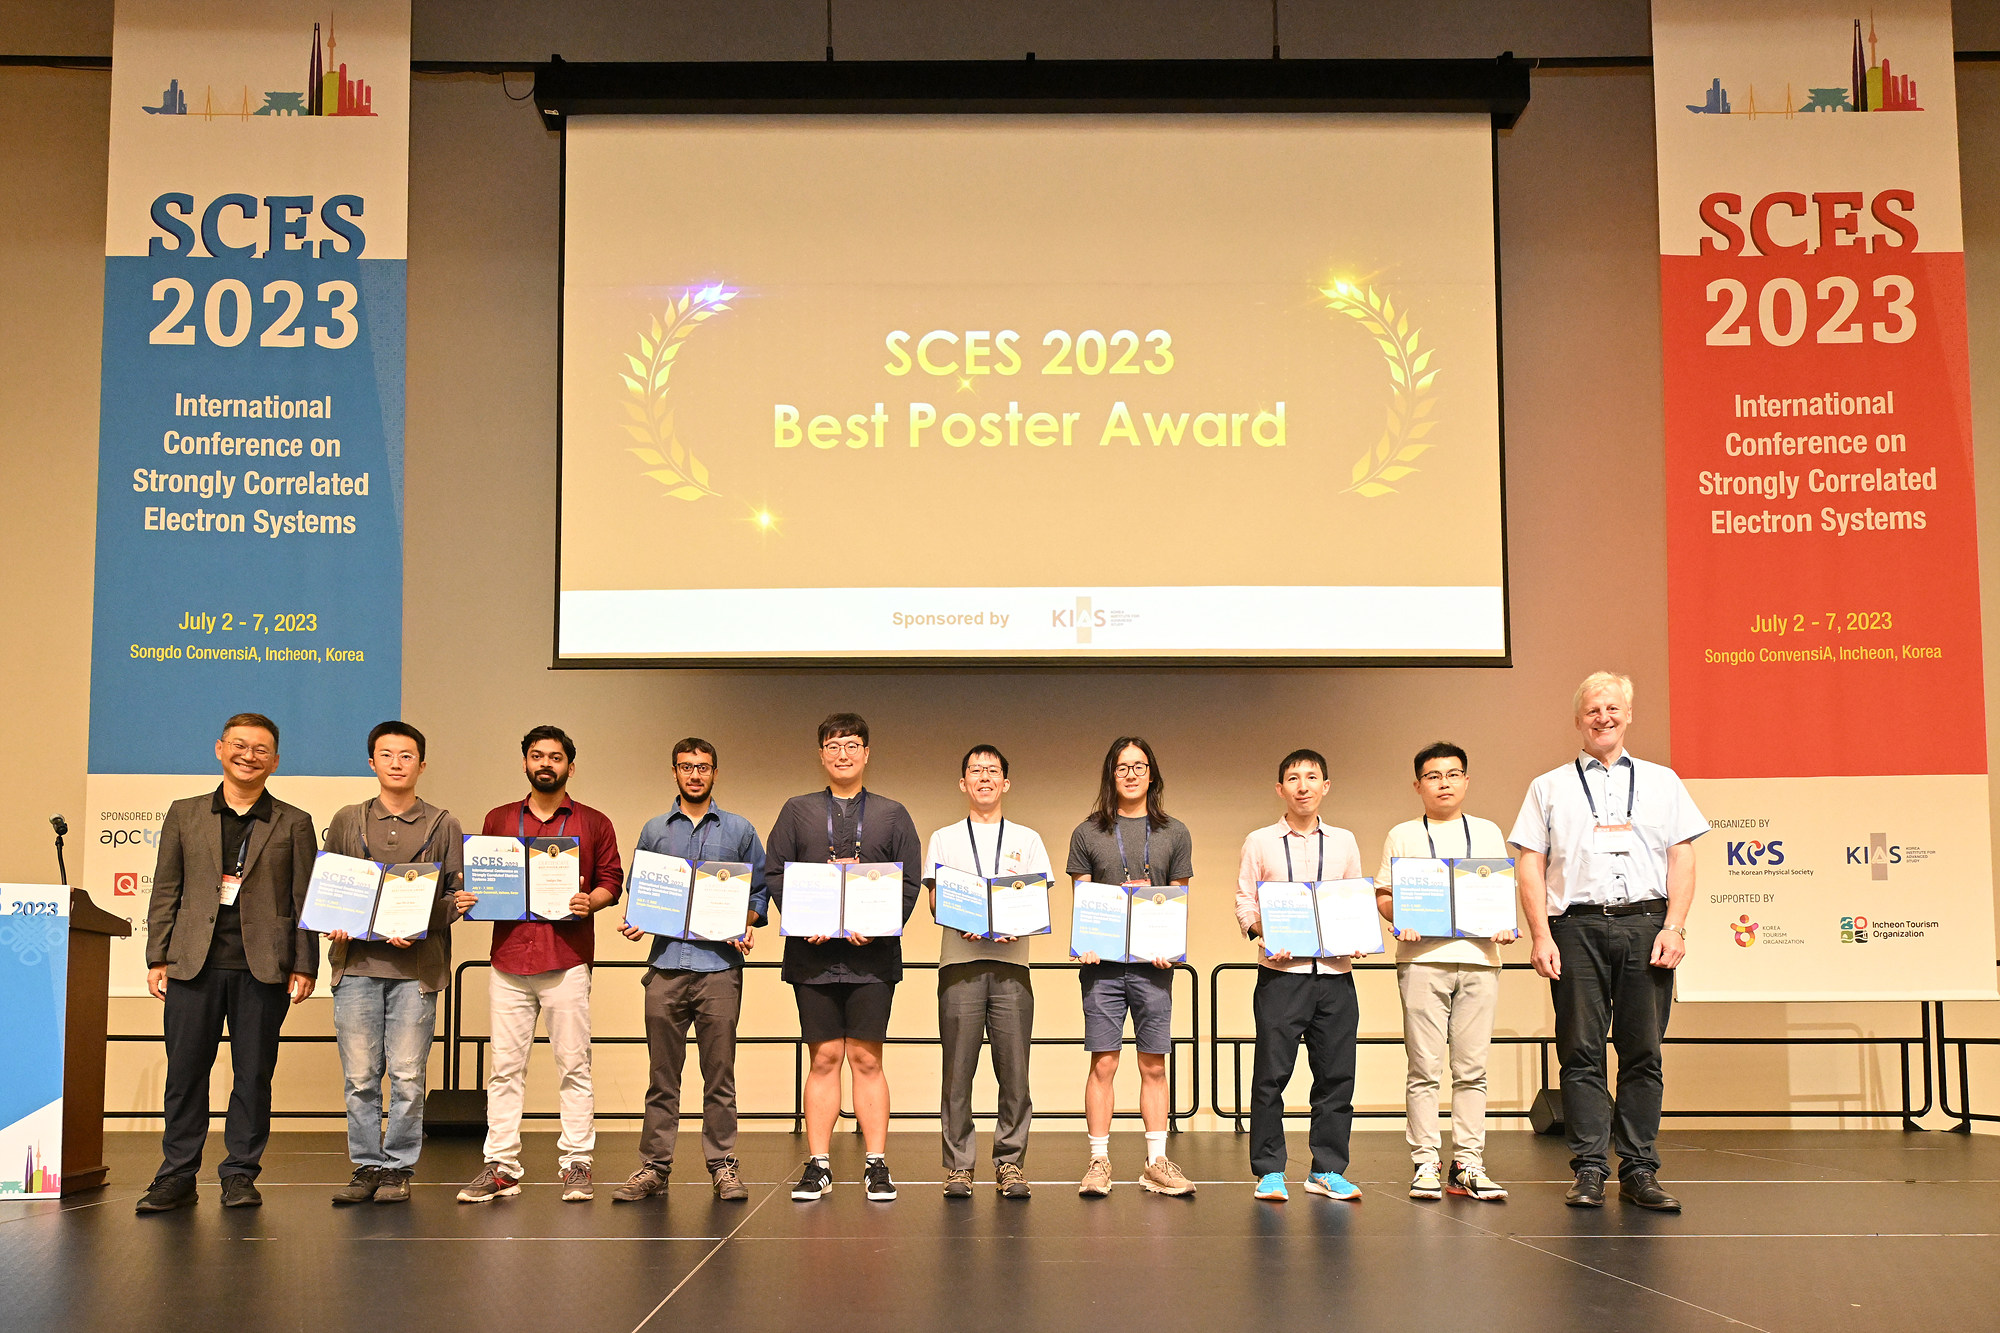 Entrants of the SCES 2023 Poster Prize stand in a row holding certificates. Behind them is a projection which says 'SCES 2023 Best Poster Prize', which is flanked either side by large SCES 2023 banners.